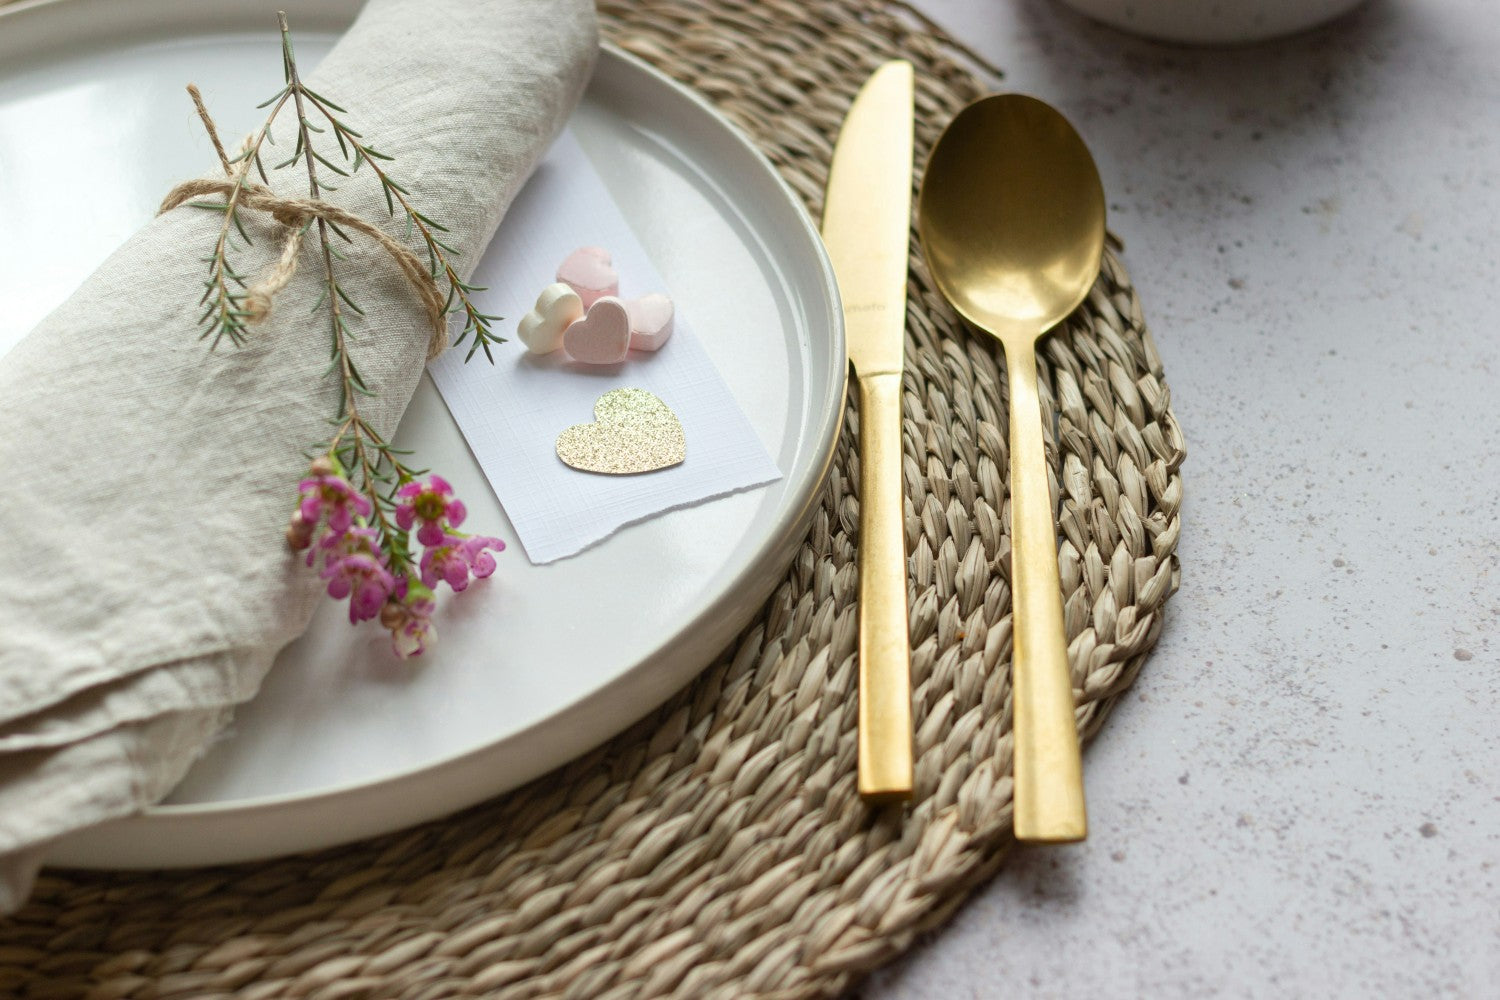 Modern valentines day dinner setting with candy hearts, flowers and gold flatware